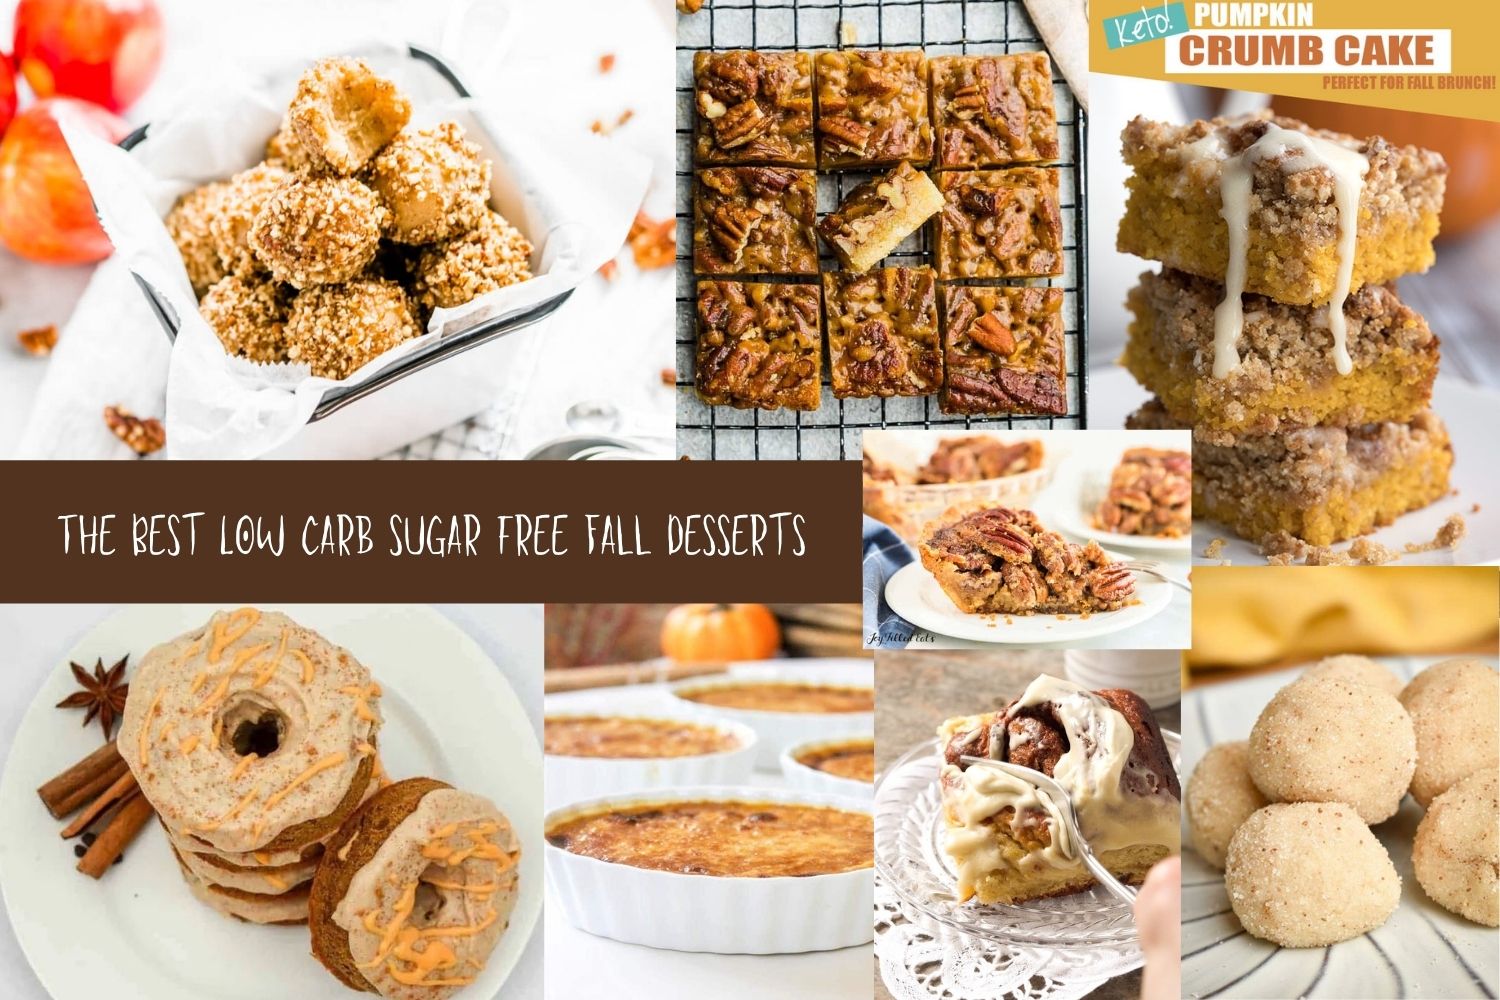 The Best "Low Carb /No Sugar" Fall Desserts